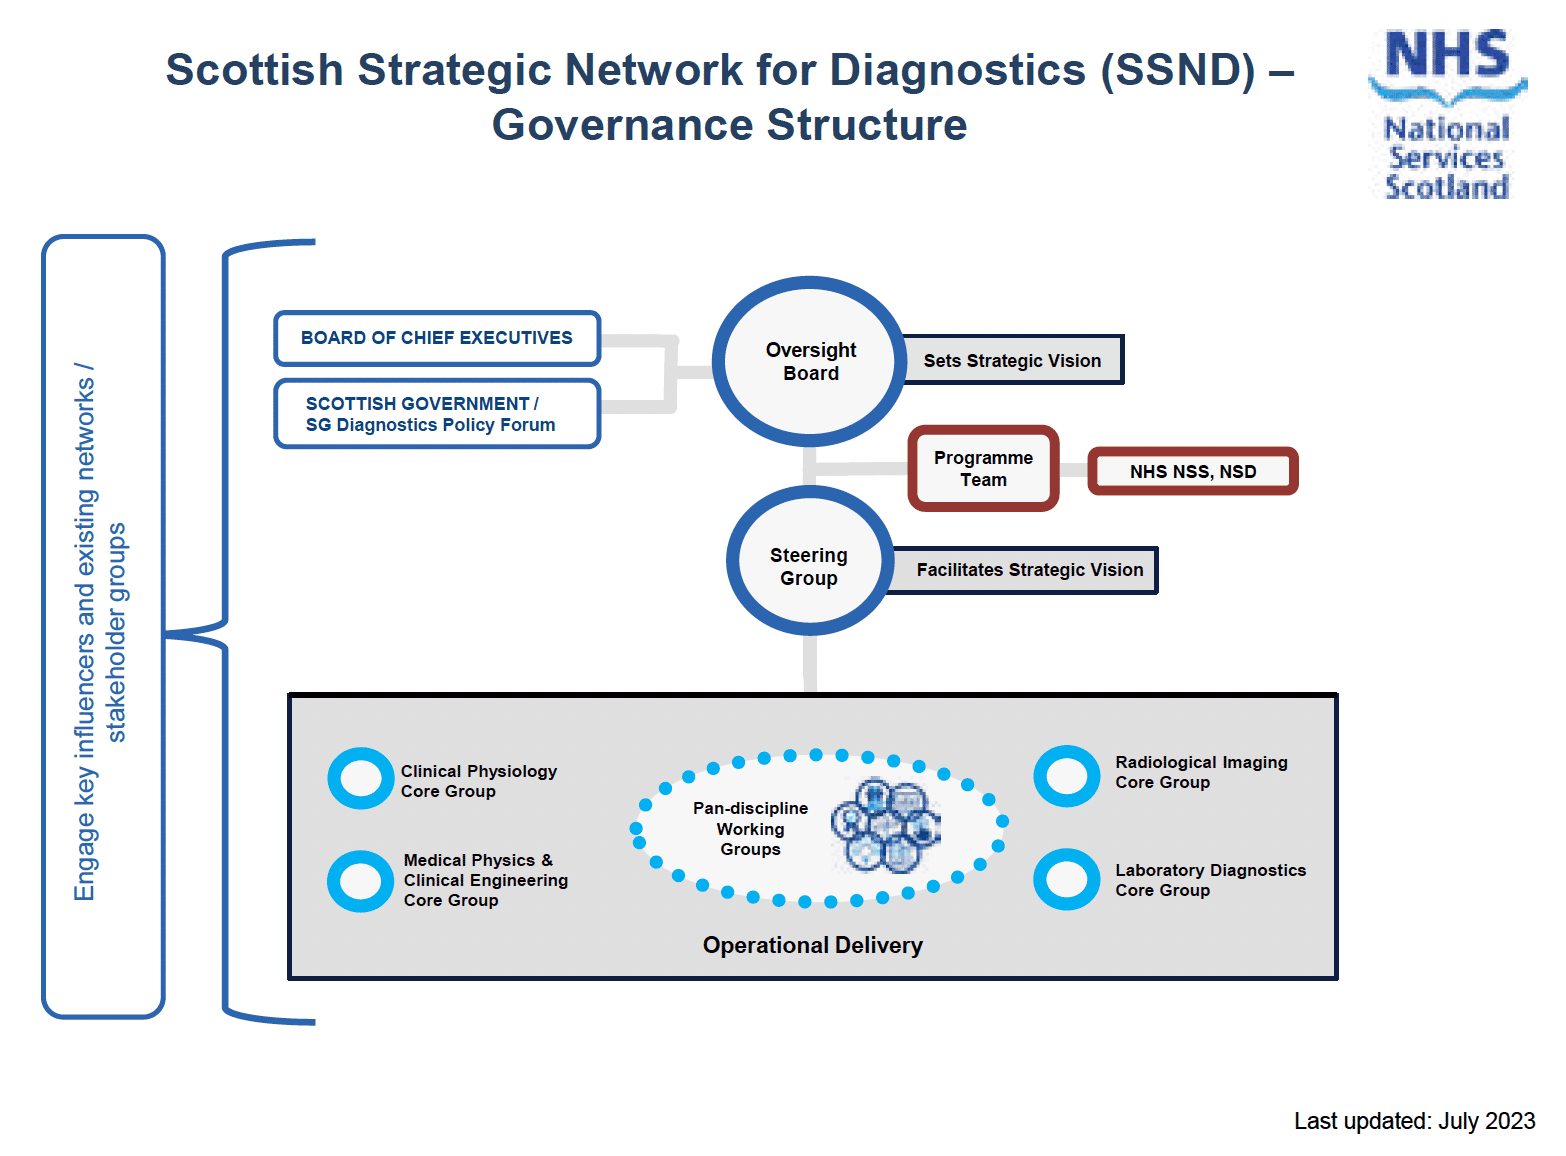 image shows the Scottish Strategic Network for Diagnostics. The structure covers imaging, laboratories, clinical physiology, medical physics and clinical engineering.